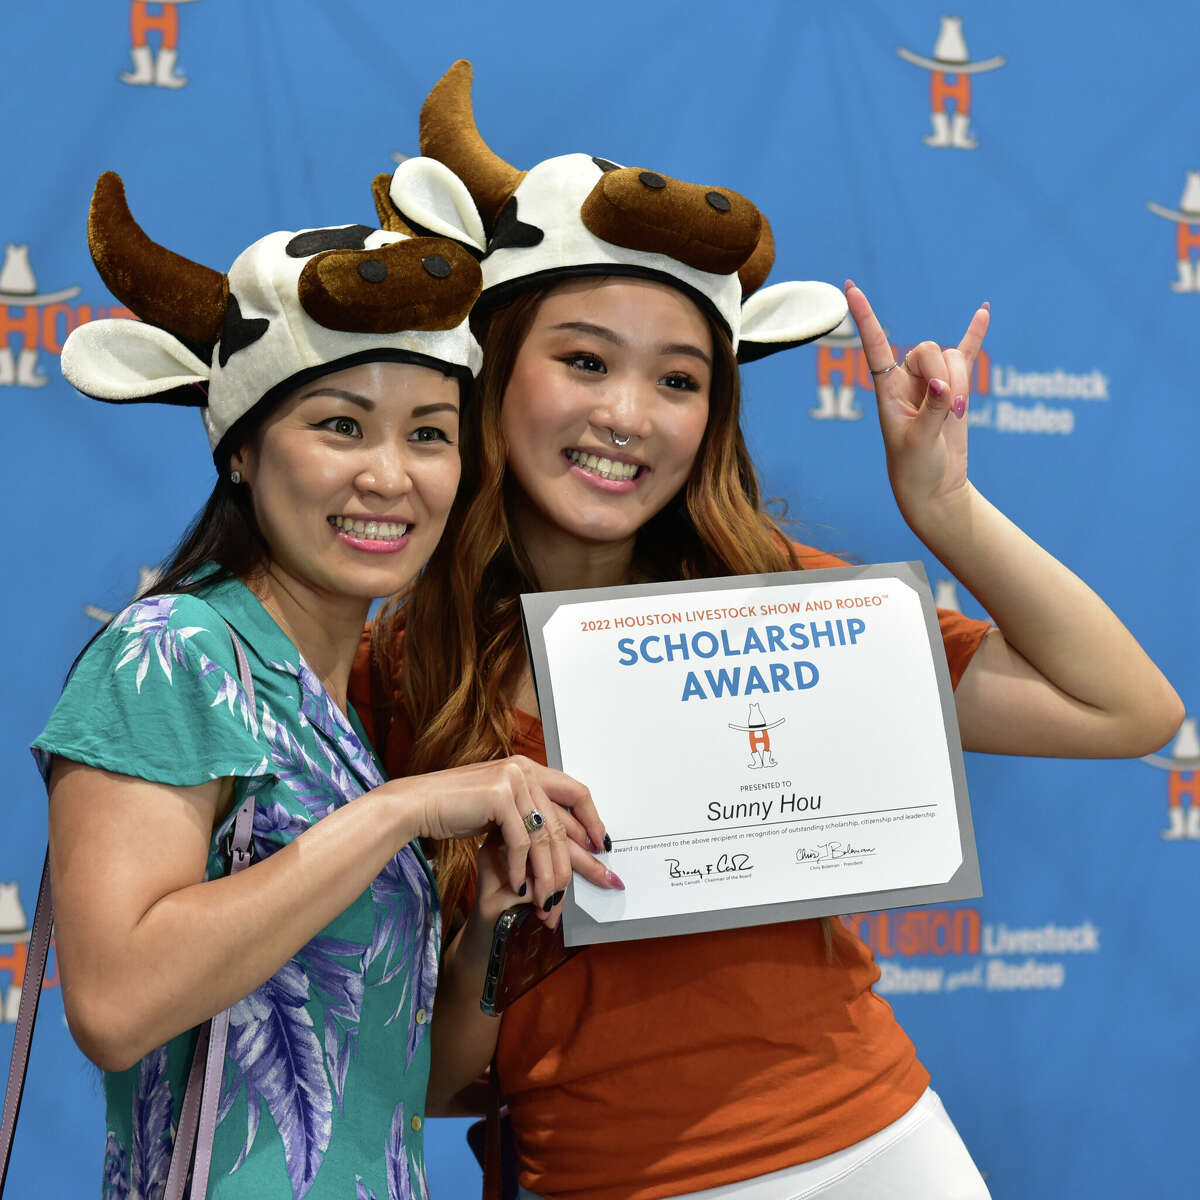 The Rodeo celebrated its 2022 educational scholarship recipients during a special Scholar Celebration & Picnic event at NRG Park Saturday, June 11. The 493 Texas students who were invited to attend represent the majority of the Rodeo’s scholarship programs, including Area Go Texan, Exhibitor, Hildebrand Family, Houston Area, Military and School Art. Each student was awarded a $20,000 scholarship to apply toward a four-year undergraduate degree.  Throughout this come-and-go event, scholars were able to interact with different donors, Rodeo staff and volunteers, and celebrate their scholarship with their fellow recipients. There were different activities and games, and the Rodeo’s World’s Championship Bar-B-Que Committee provided attendees with a barbecue lunch.